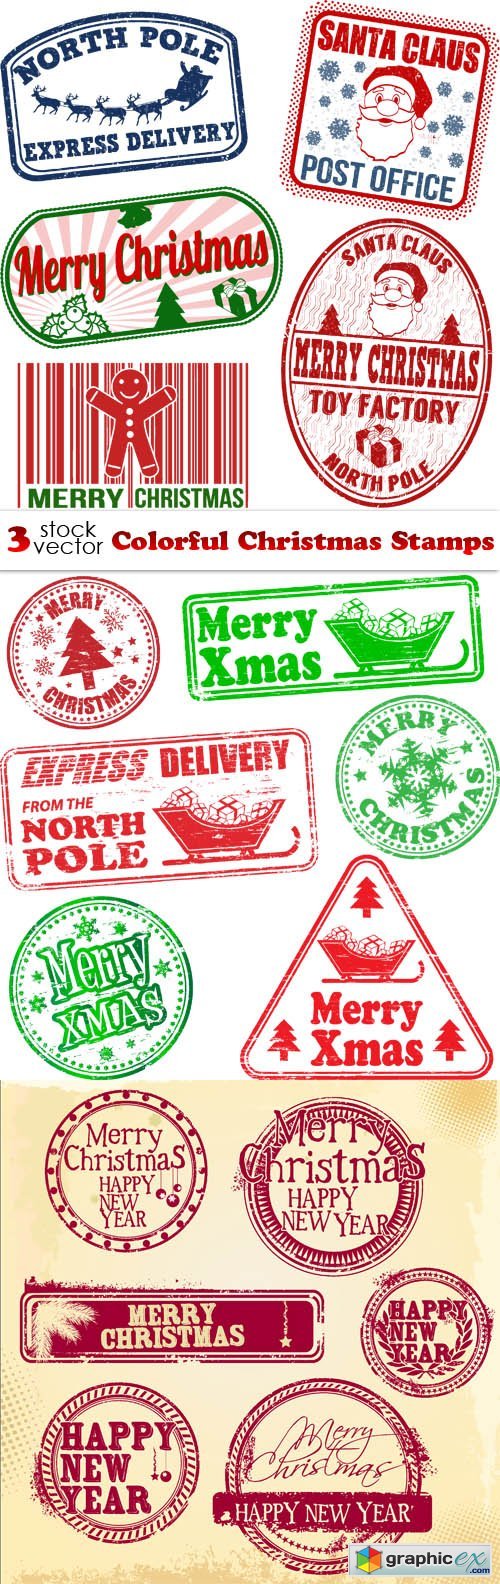 Vectors - Colorful Christmas Stamps